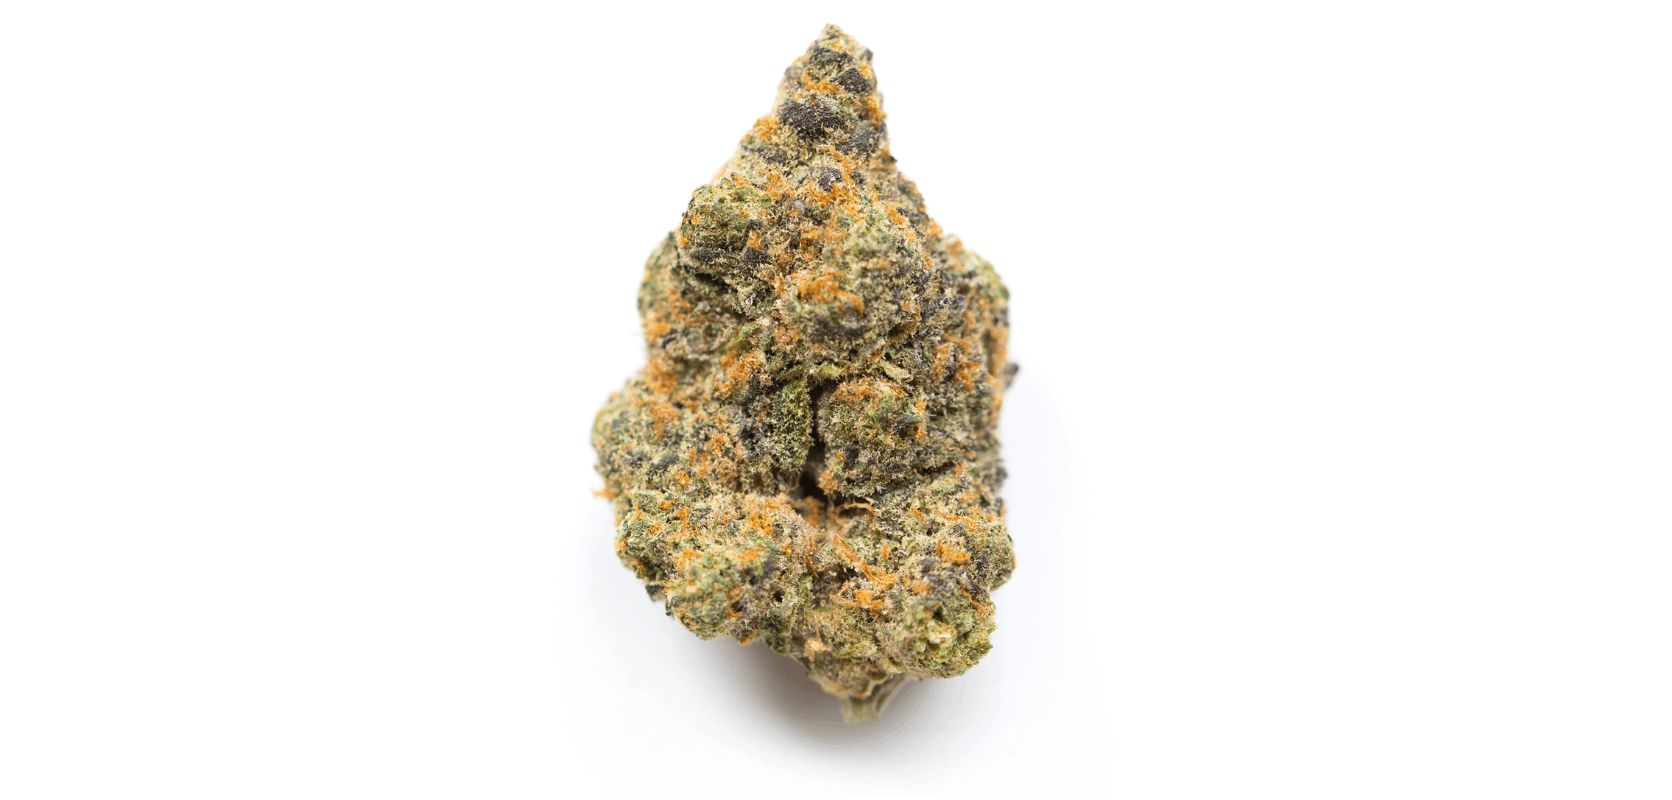 The Bruce Banner strain was created by a Colorado-based company called Delta 9 Genetics. It was named after the alter ego of Marvel Comic's superhero, The Hulk, and is known for its incredibly potent effects. 